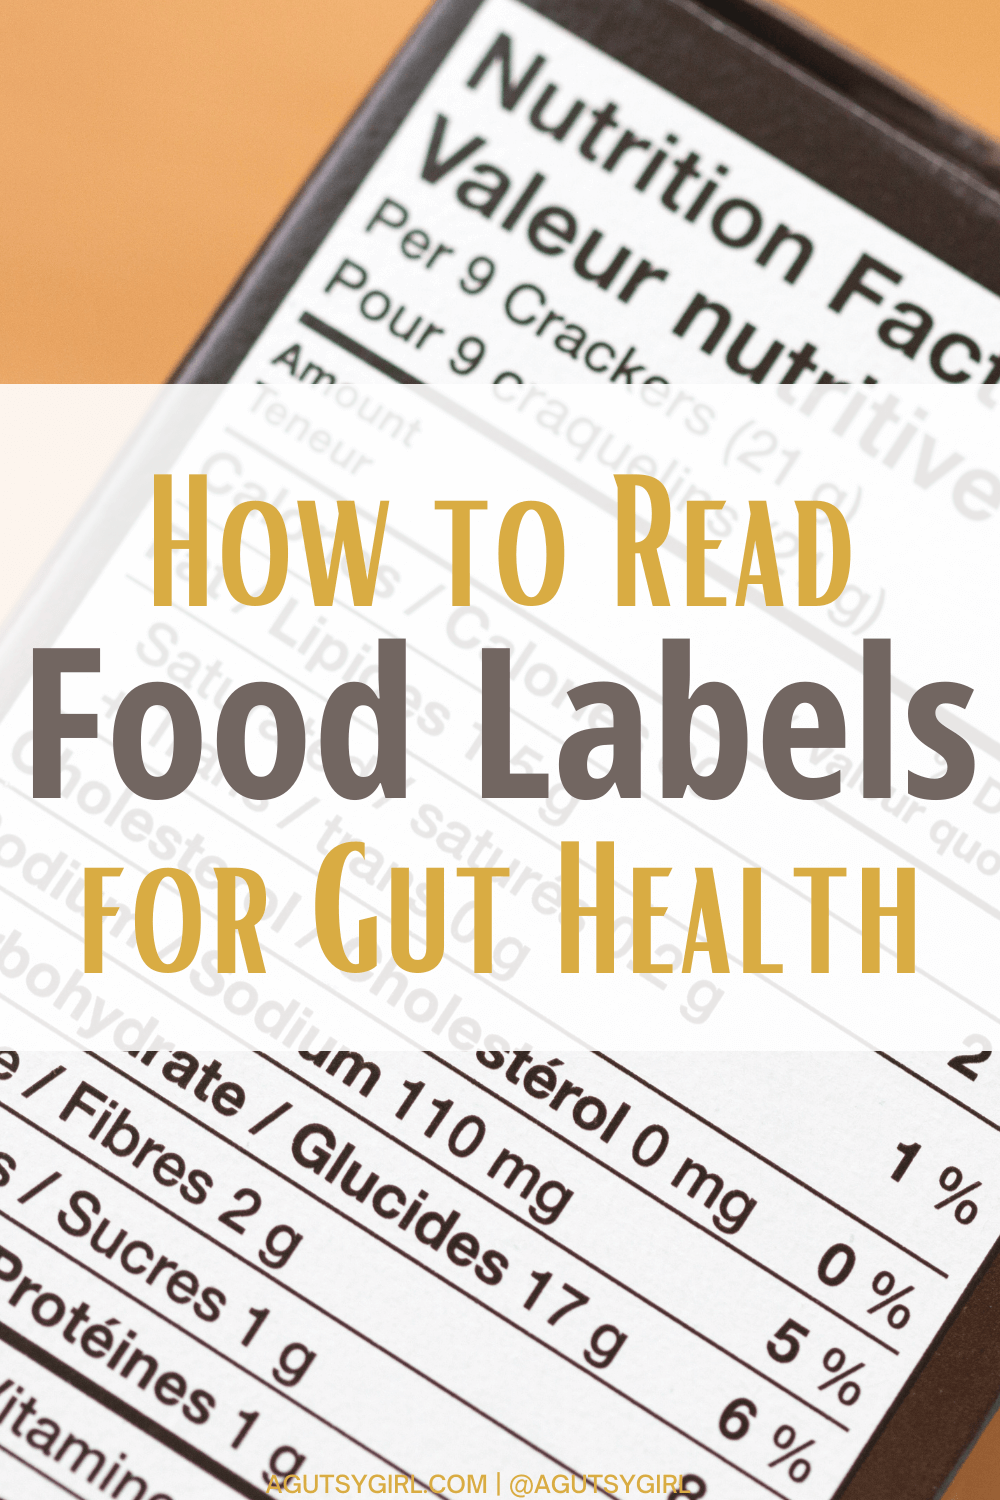 How to Read Food Labels for Gut Health agutsygirl.com #foodlabel #nutritionlabel #guthealth